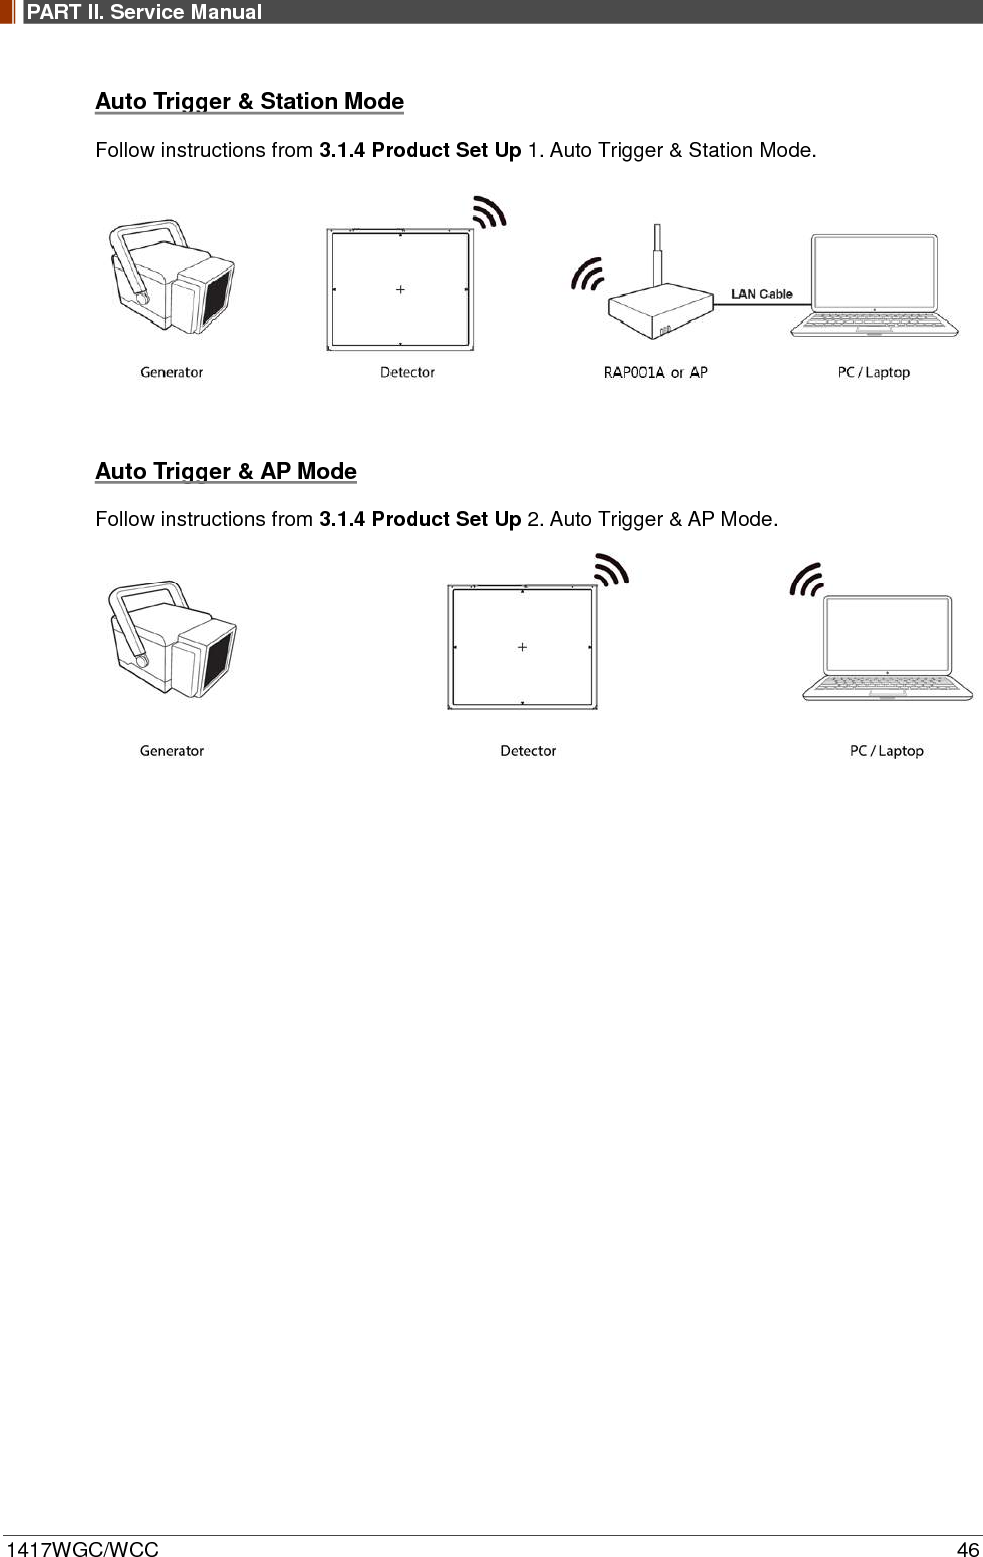 PART II. Service Manual  1417WGC/WCC 46 Auto Trigger &amp; Station Mode Follow instructions from 3.1.4 Product Set Up 1. Auto Trigger &amp; Station Mode.   Auto Trigger &amp; AP Mode Follow instructions from 3.1.4 Product Set Up 2. Auto Trigger &amp; AP Mode.                     